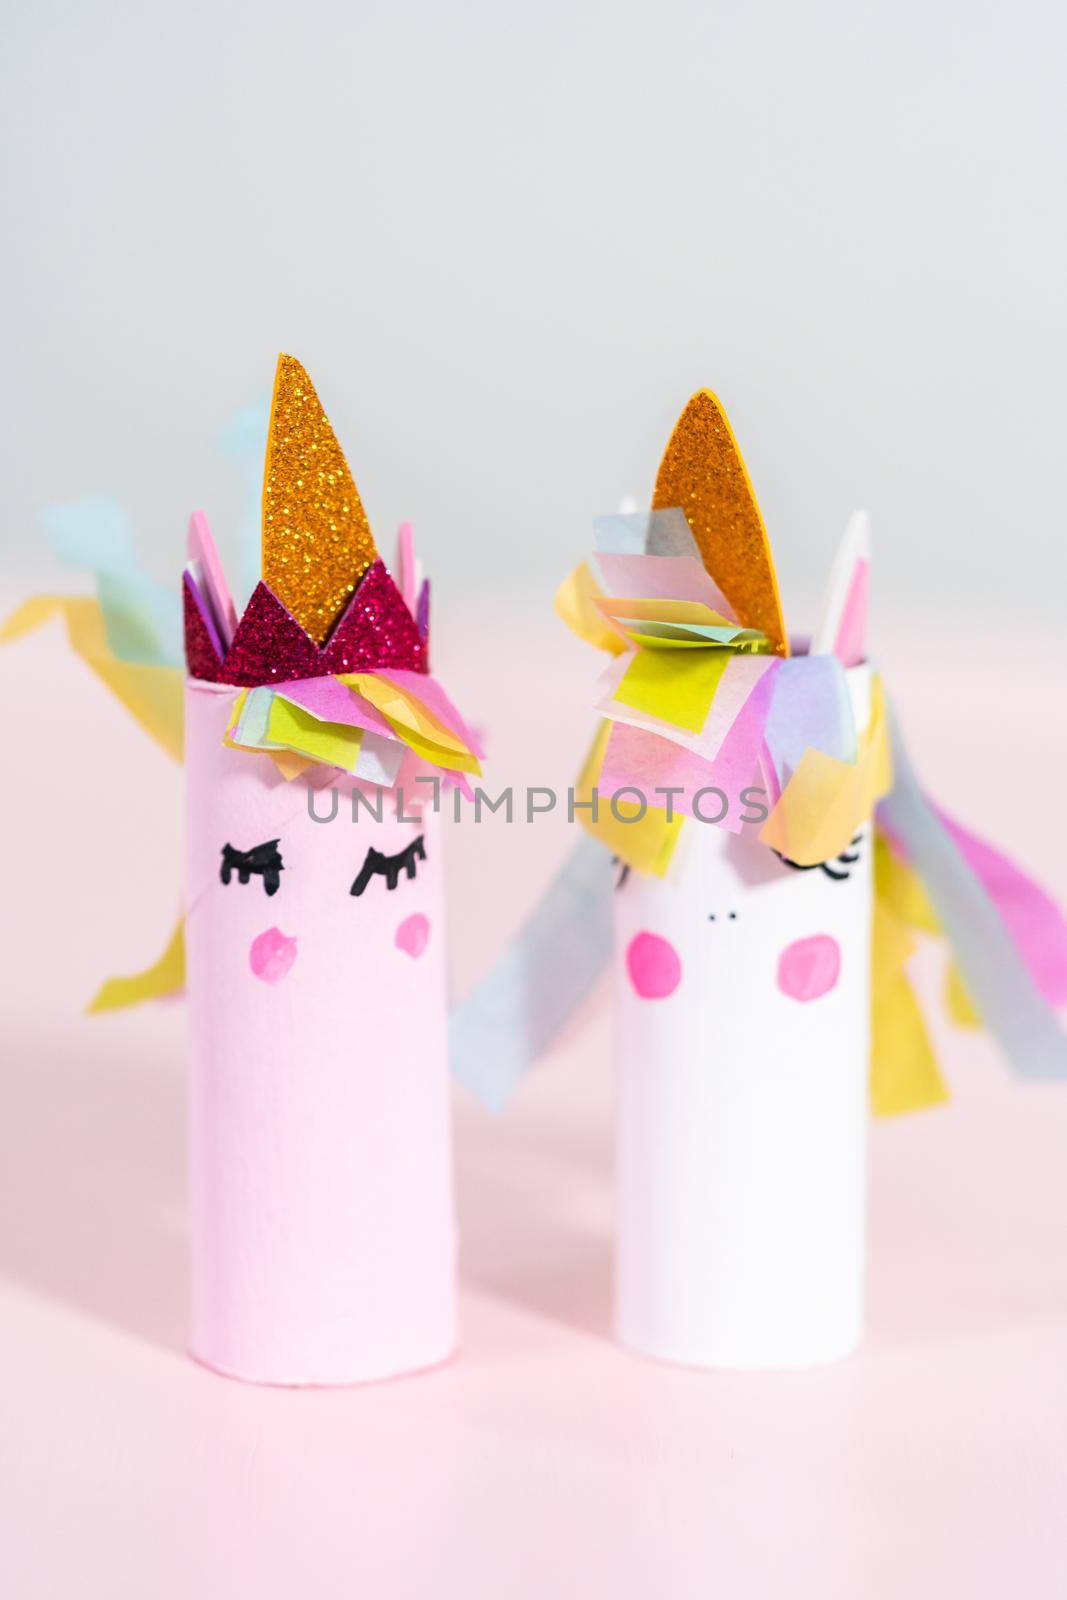 Toilet paper roll crafts unicorn by arinahabich